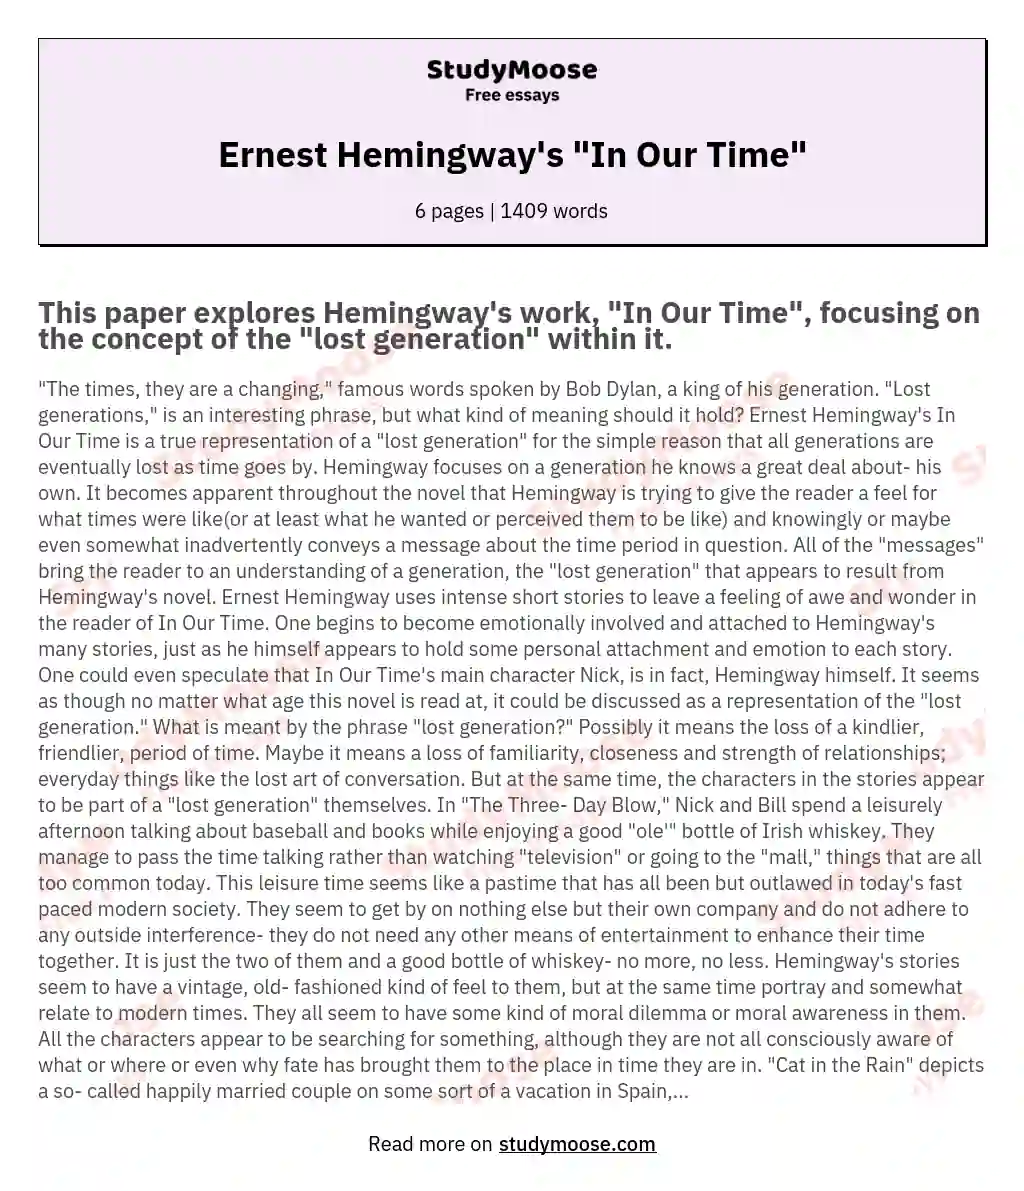 Ernest Hemingway's "In Our Time" essay